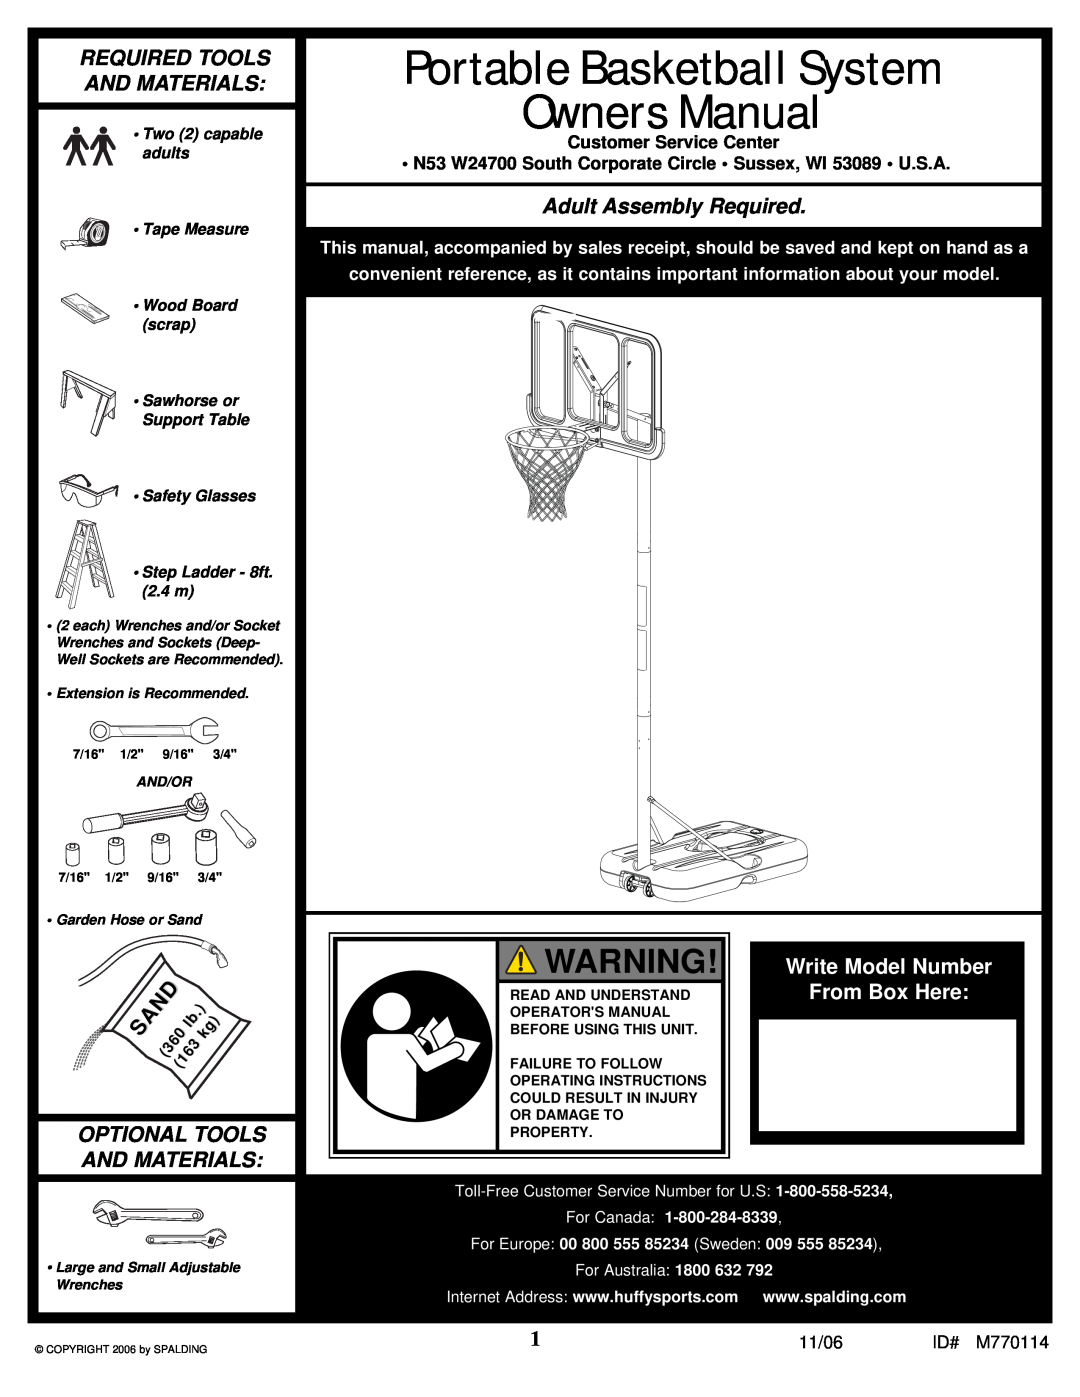 Huffy WM2688H manual Portable Basketball System Owners Manual, Required Tools And Materials, Adult Assembly Required 